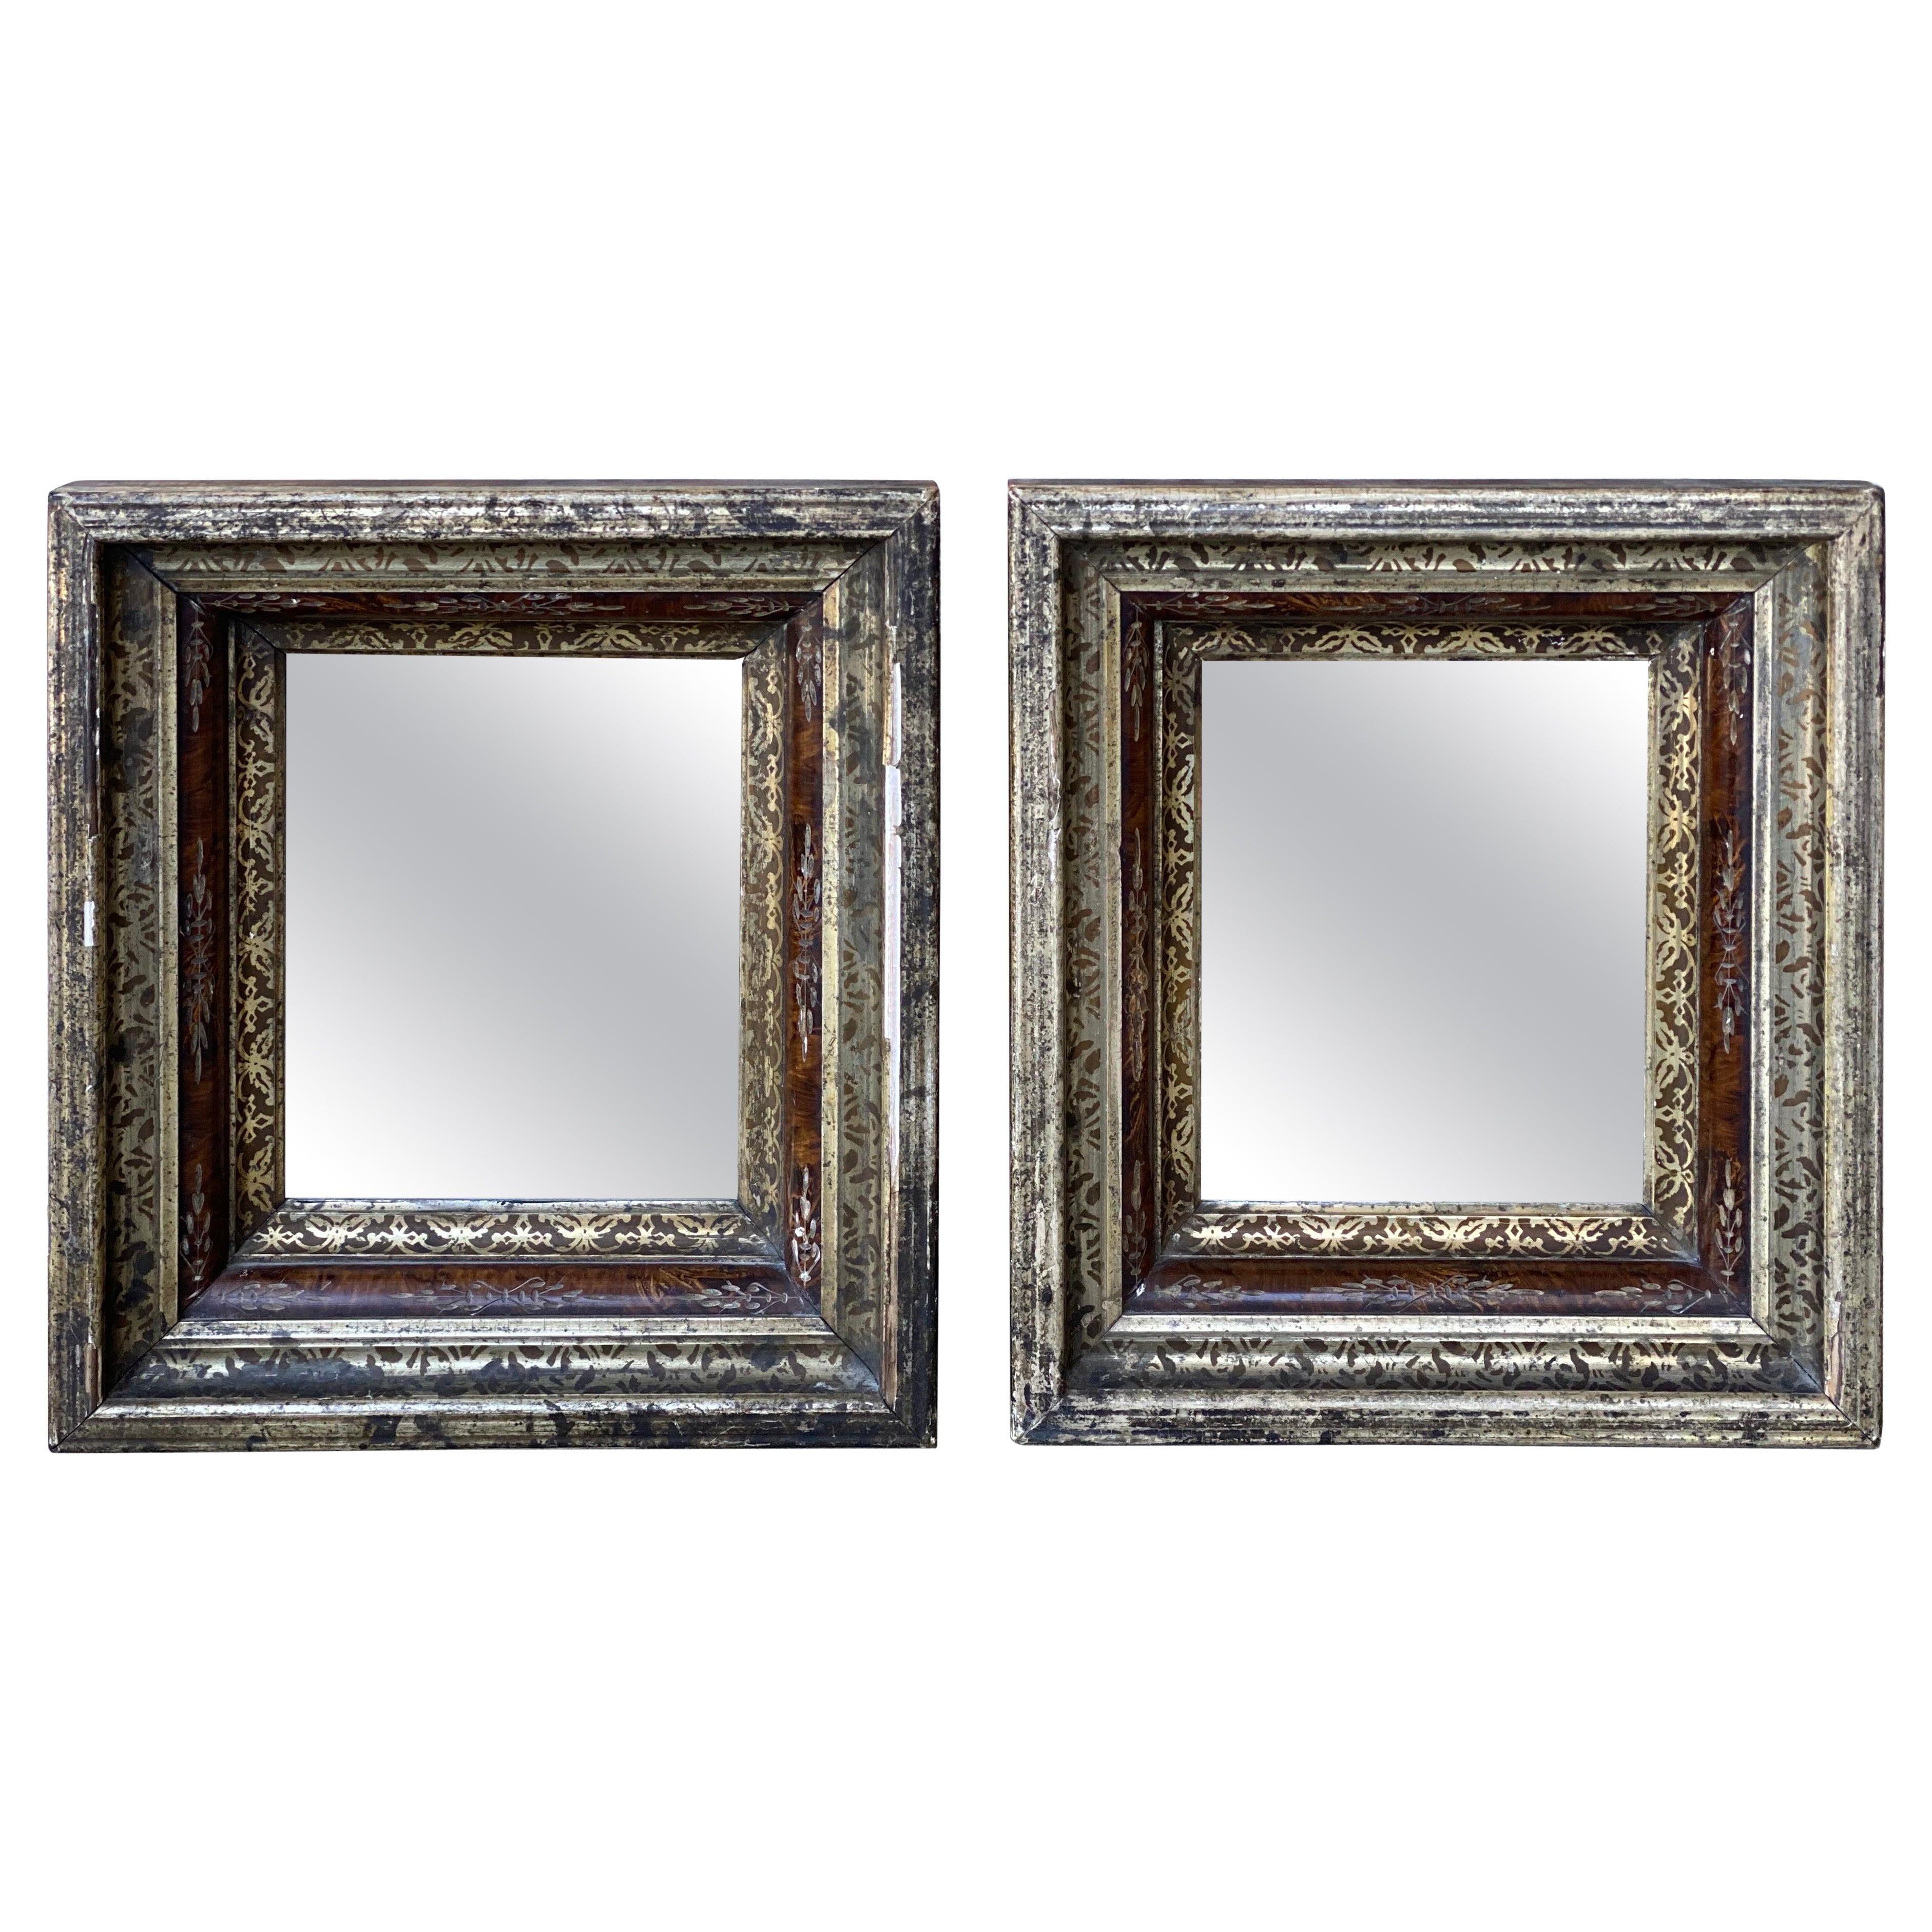 Pair of 19th Century Small Silver-Gilt & Faux Tortoise Shell Patterned Mirrors For Sale